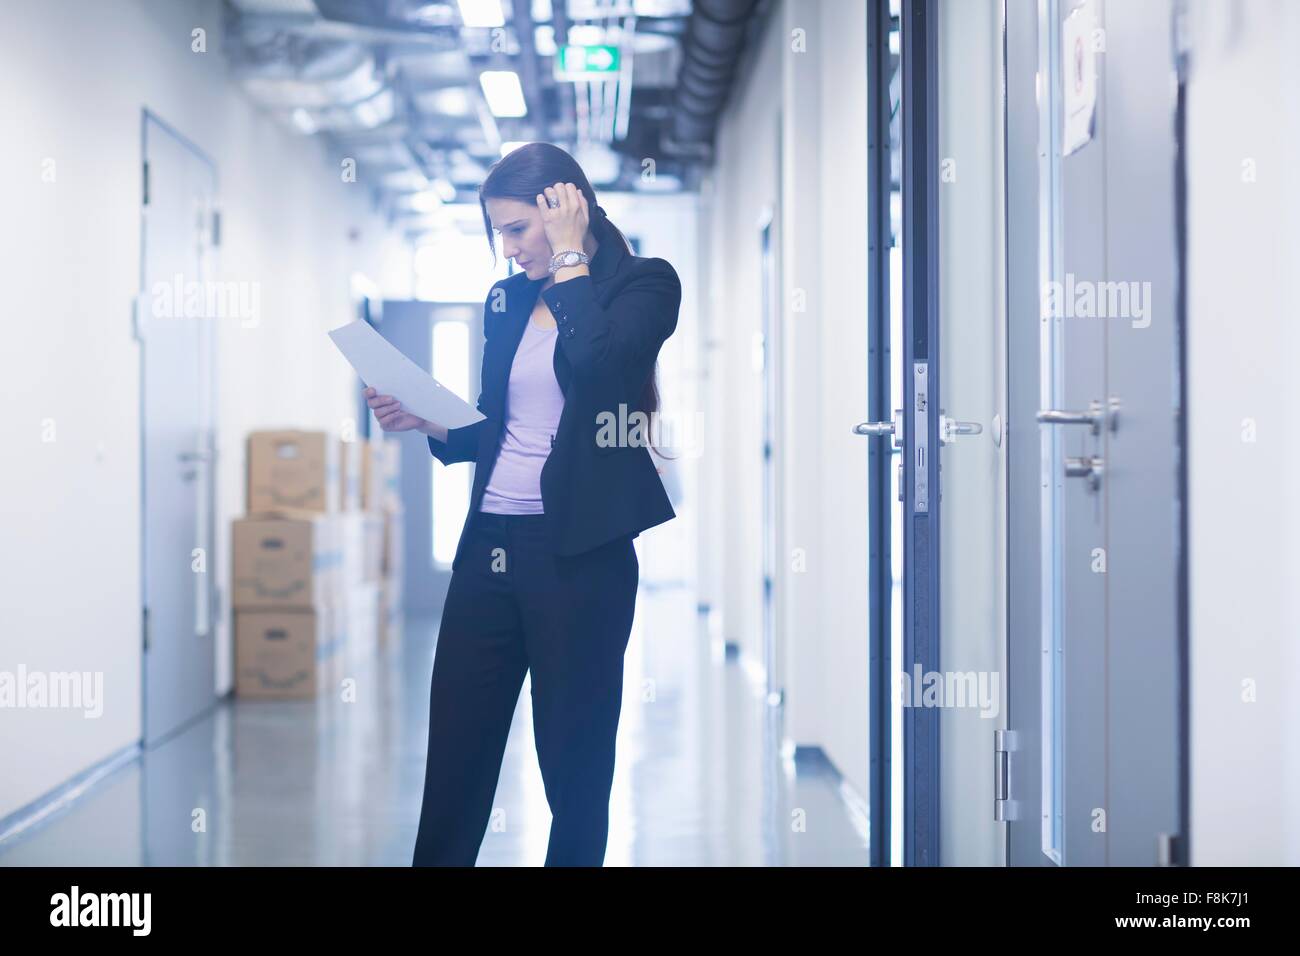 Young woman standing in office corridor looking down at paperwork scratching head Stock Photo